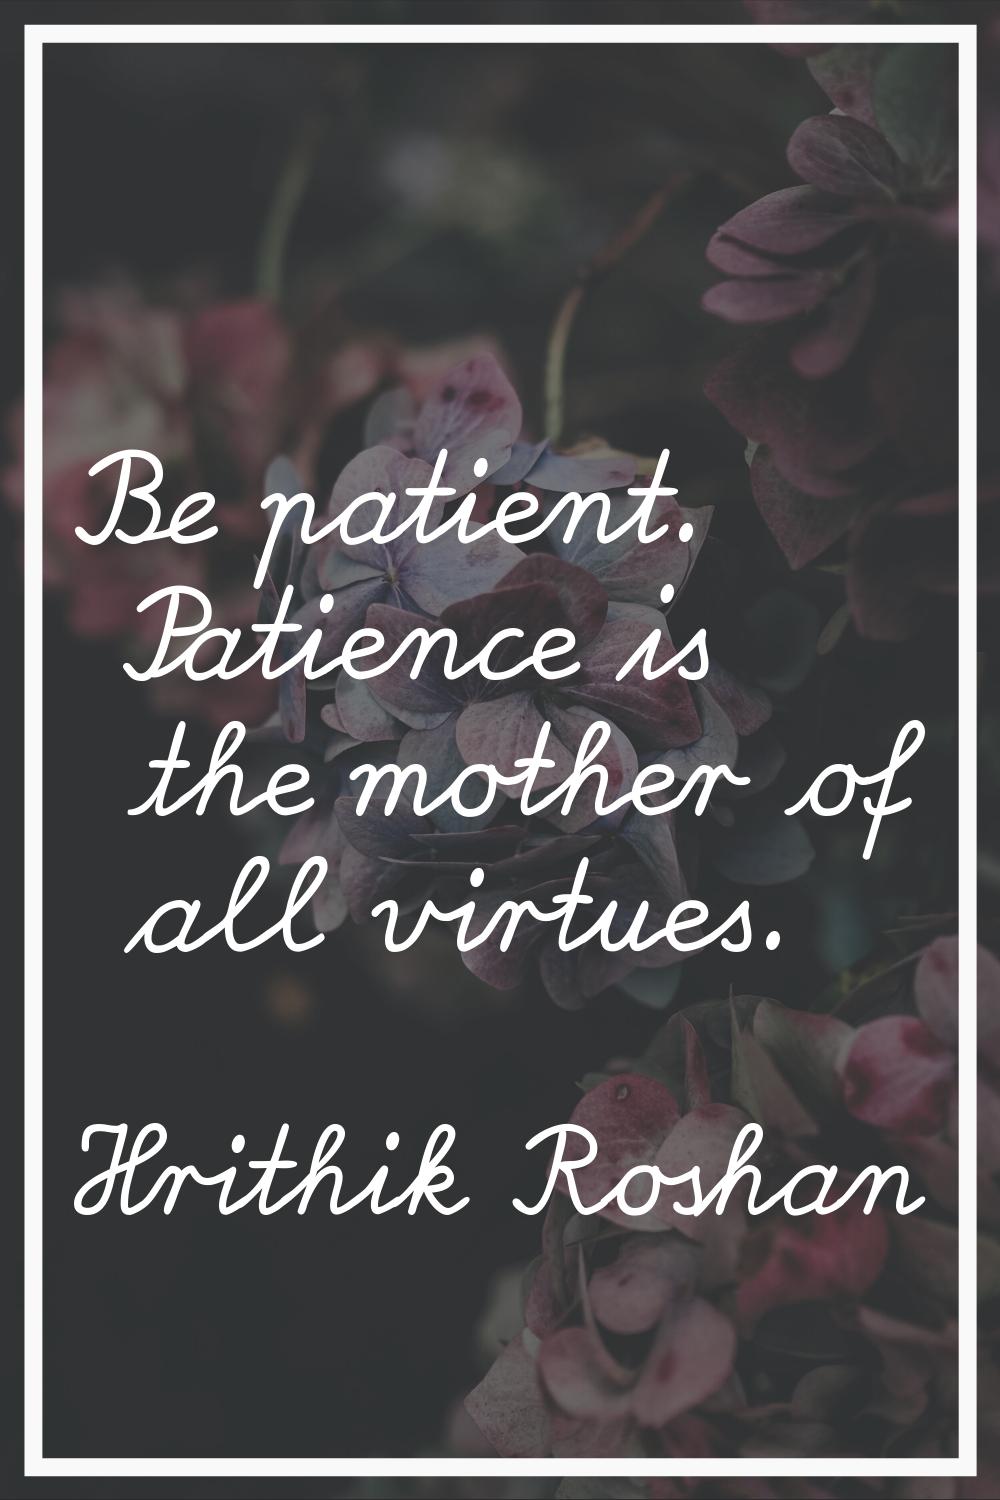 Be patient. Patience is the mother of all virtues.